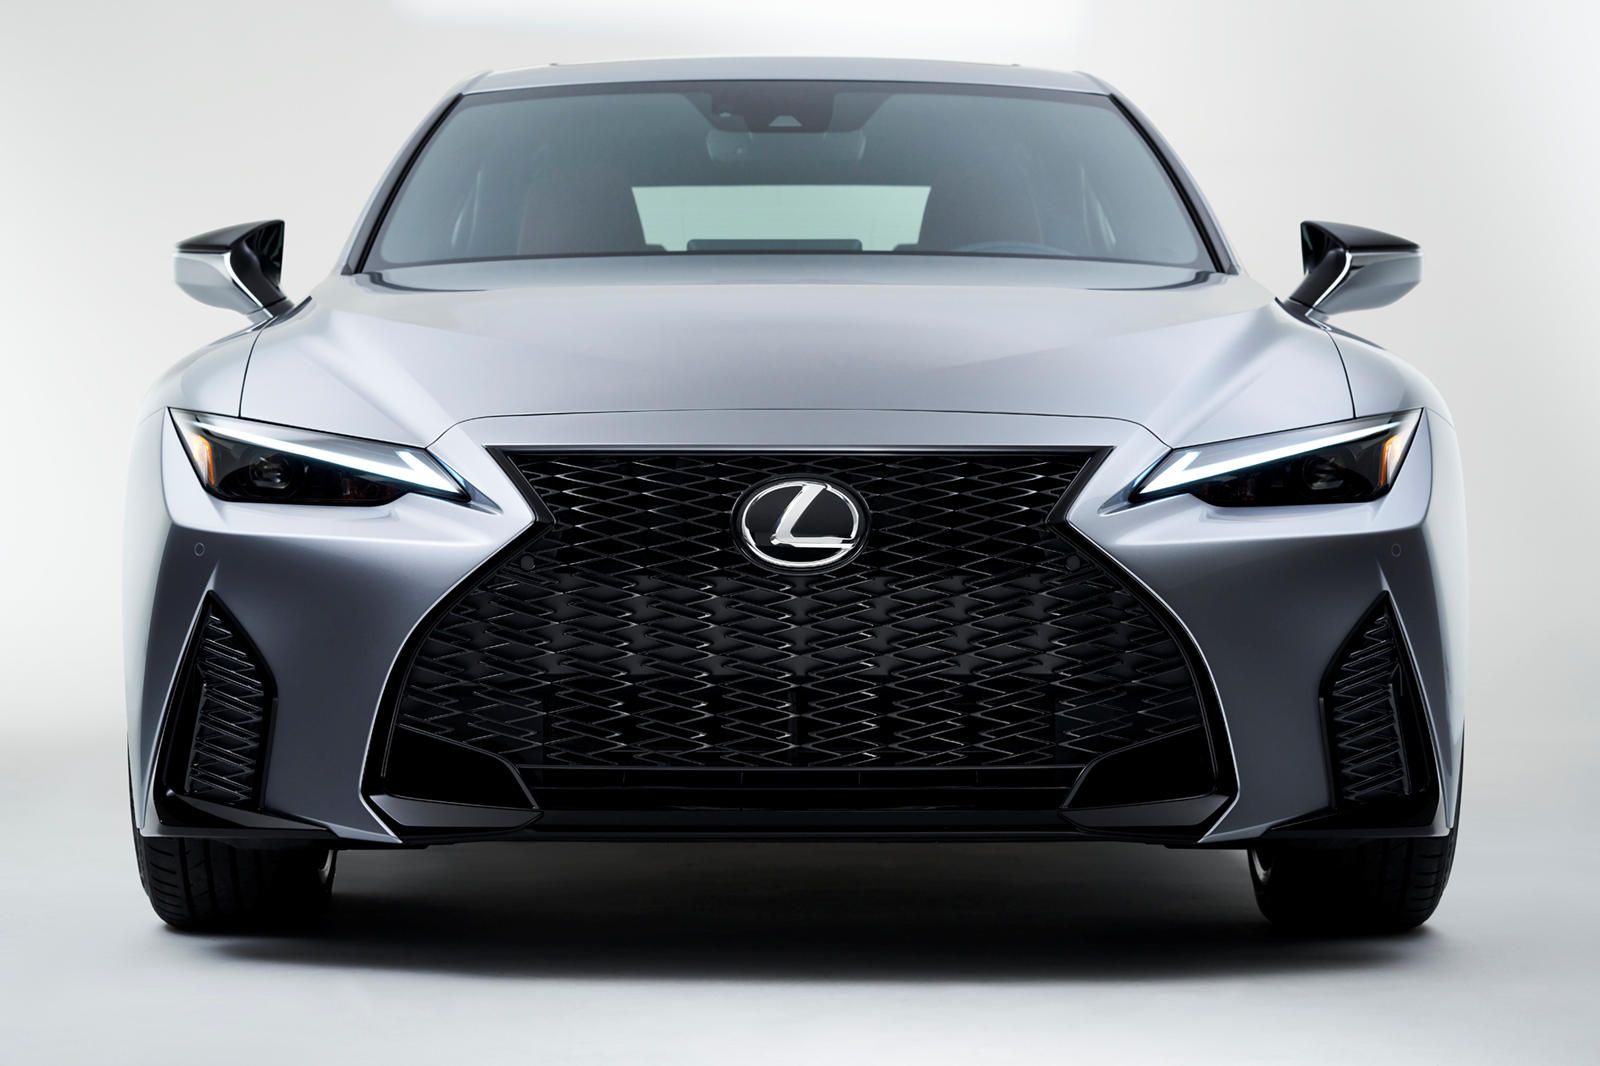 Lexus IS Arrives With Improved Tech And Driving Dynamics